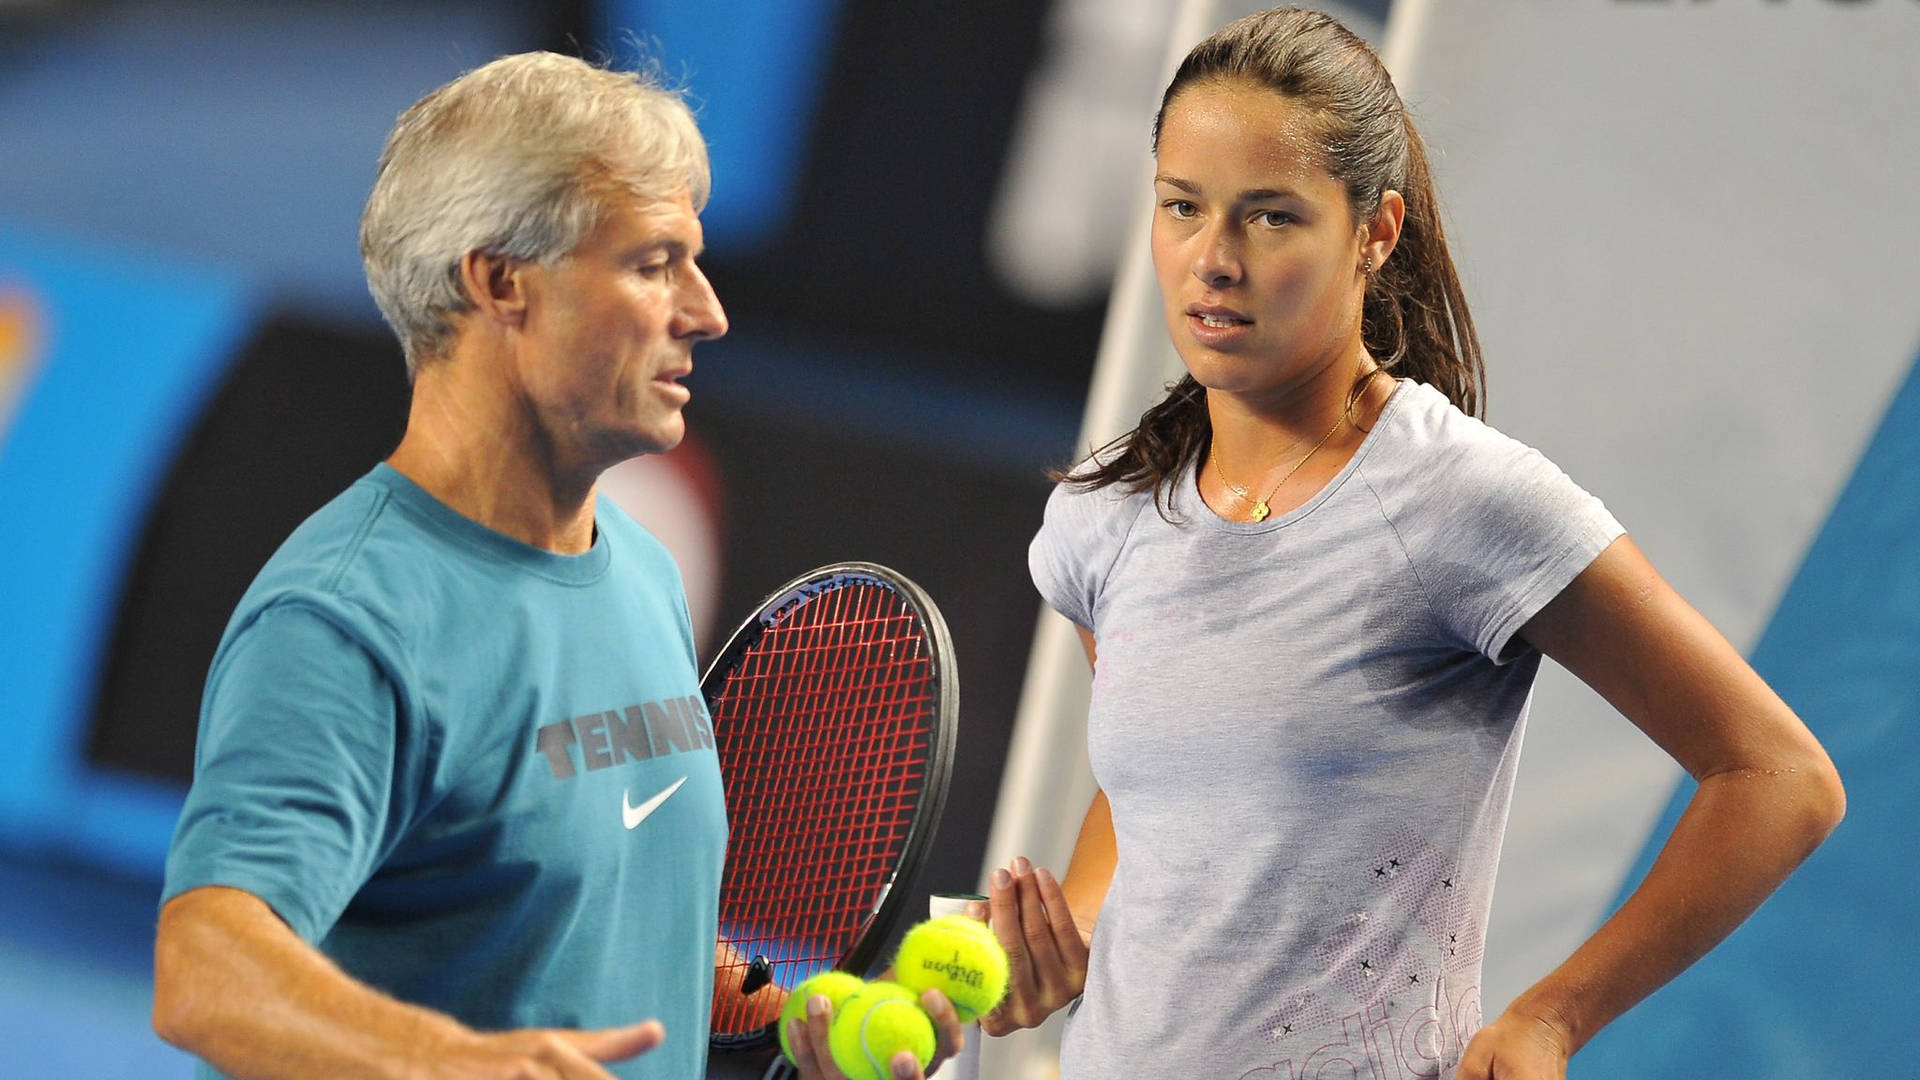 Ana Ivanovic With Her Coach Wallpaper